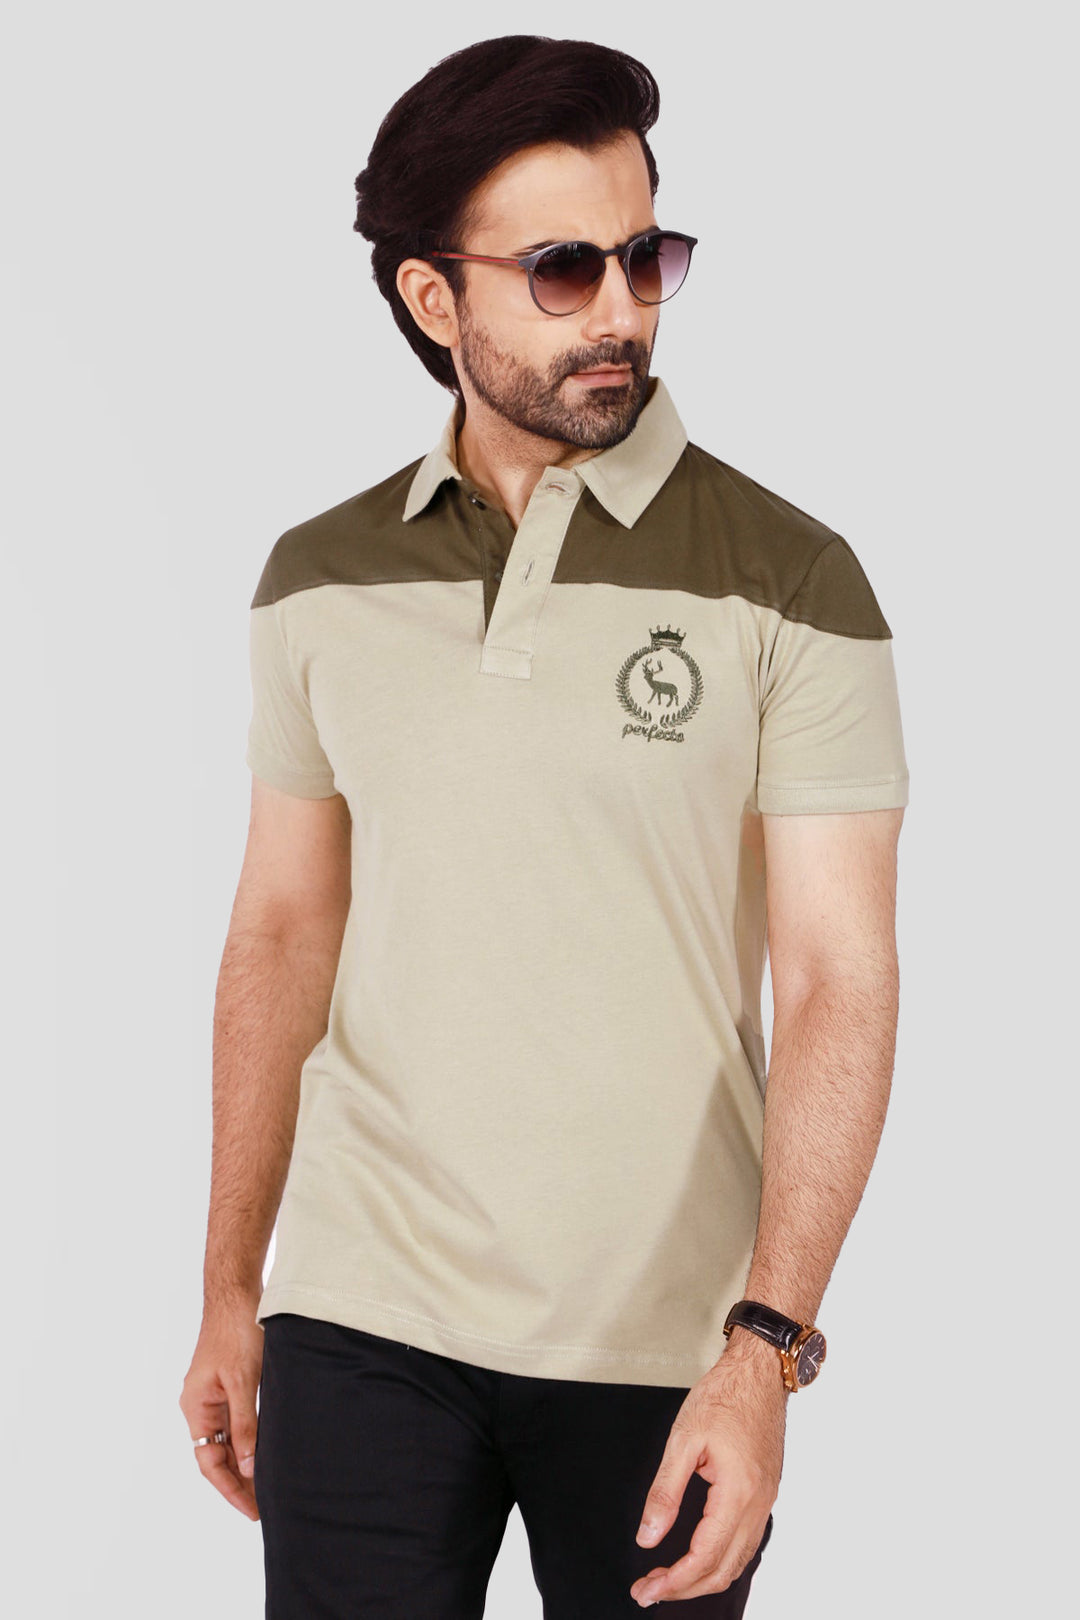 Olive Cut & Sew Embroidered Polo Shirt - S22 - MP0120R